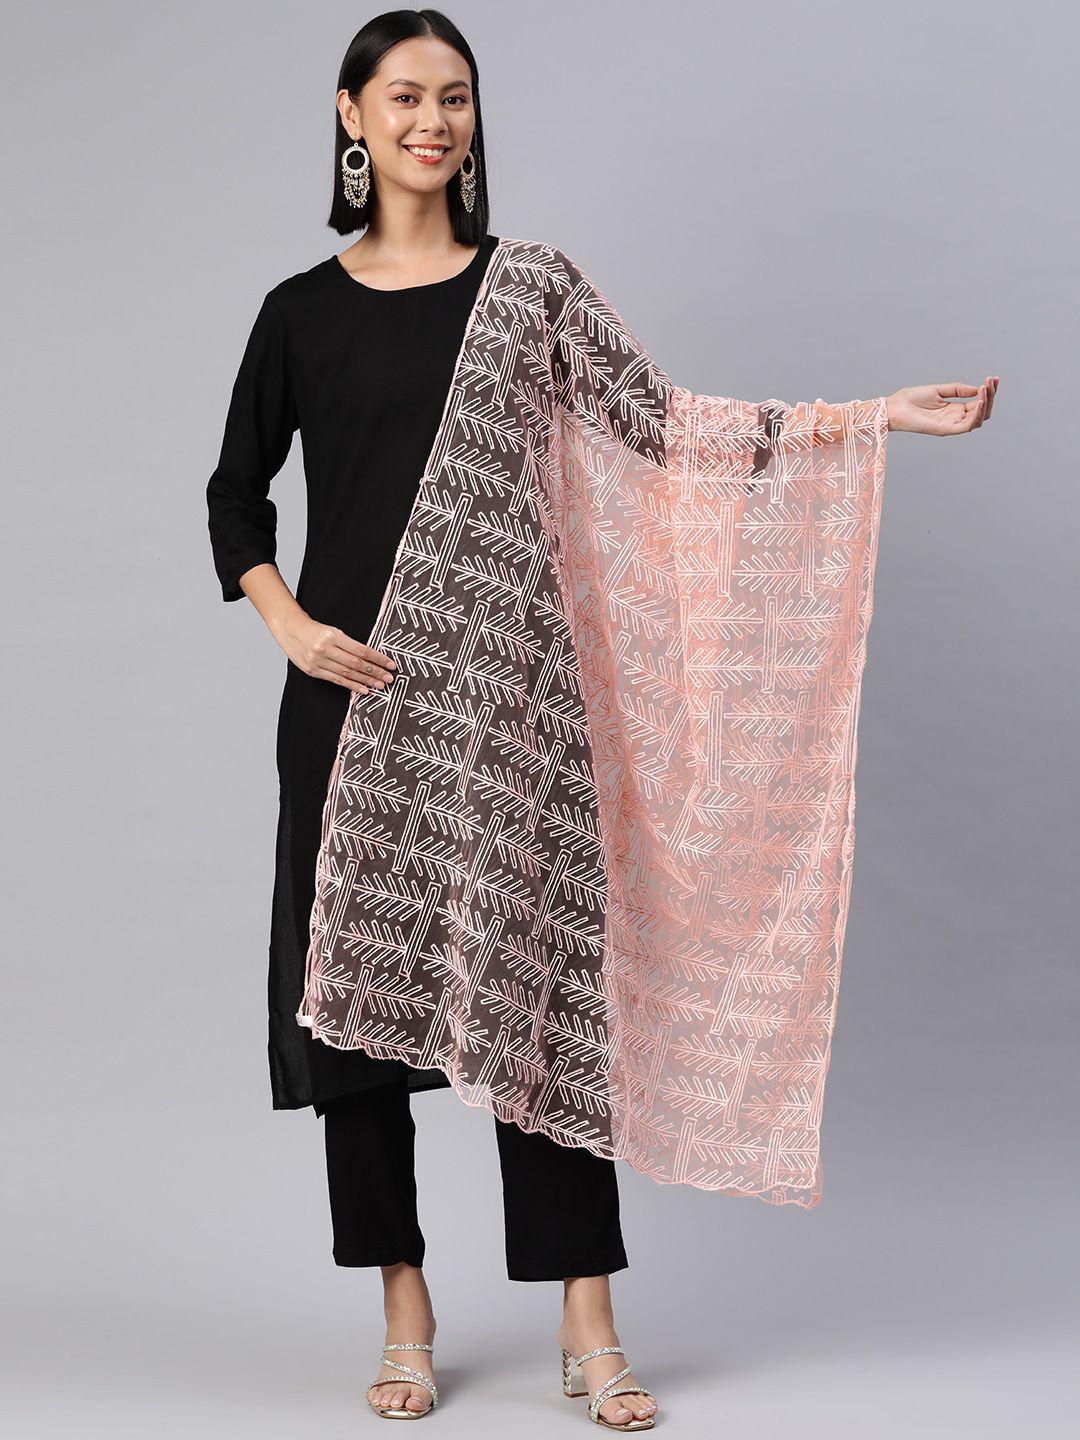 rang gali embroidered dupatta with thread work